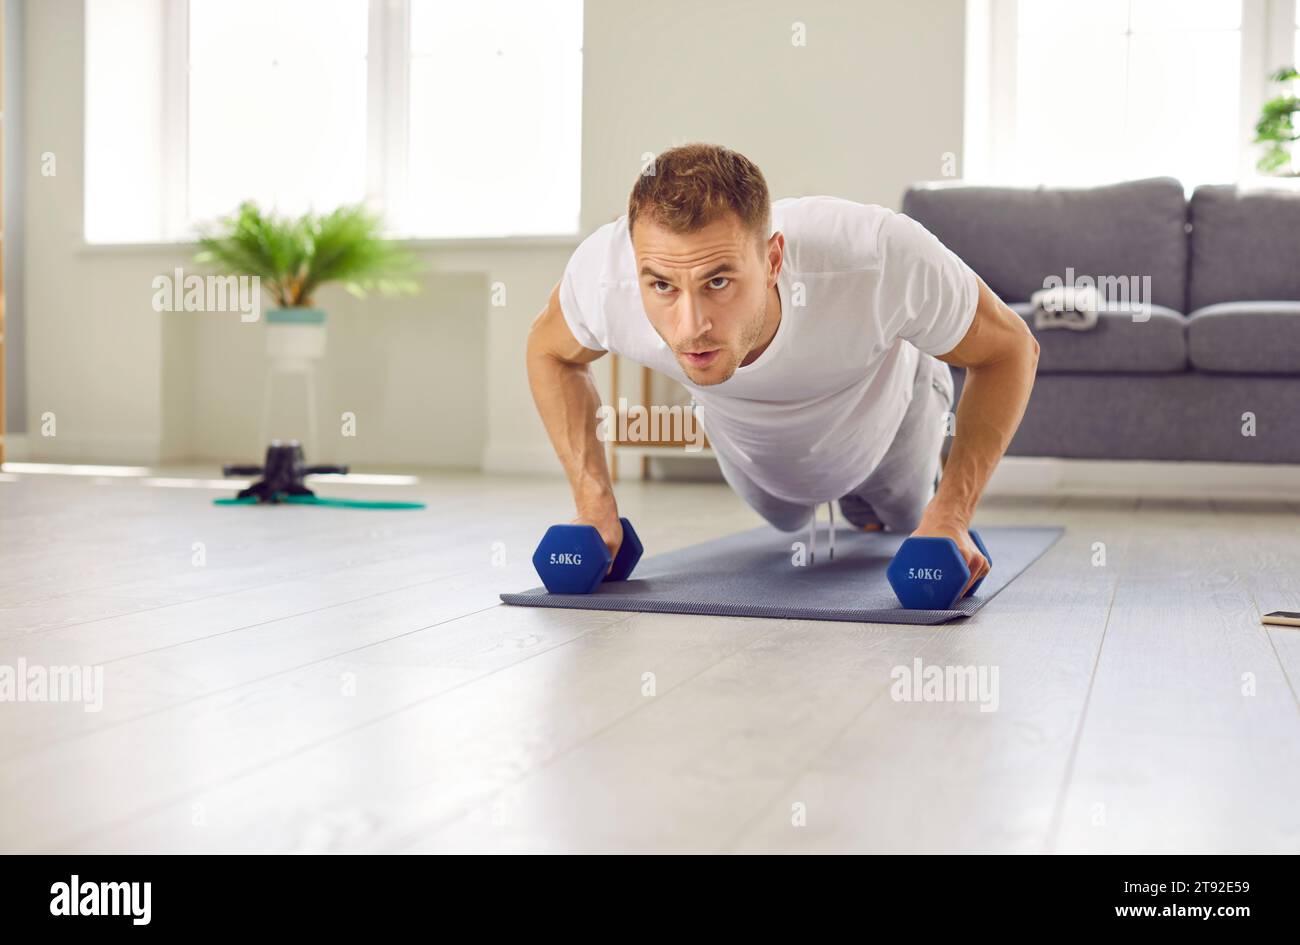 Portrait of serious sports man who does sports at home and trains muscles using dumbbells. Stock Photo